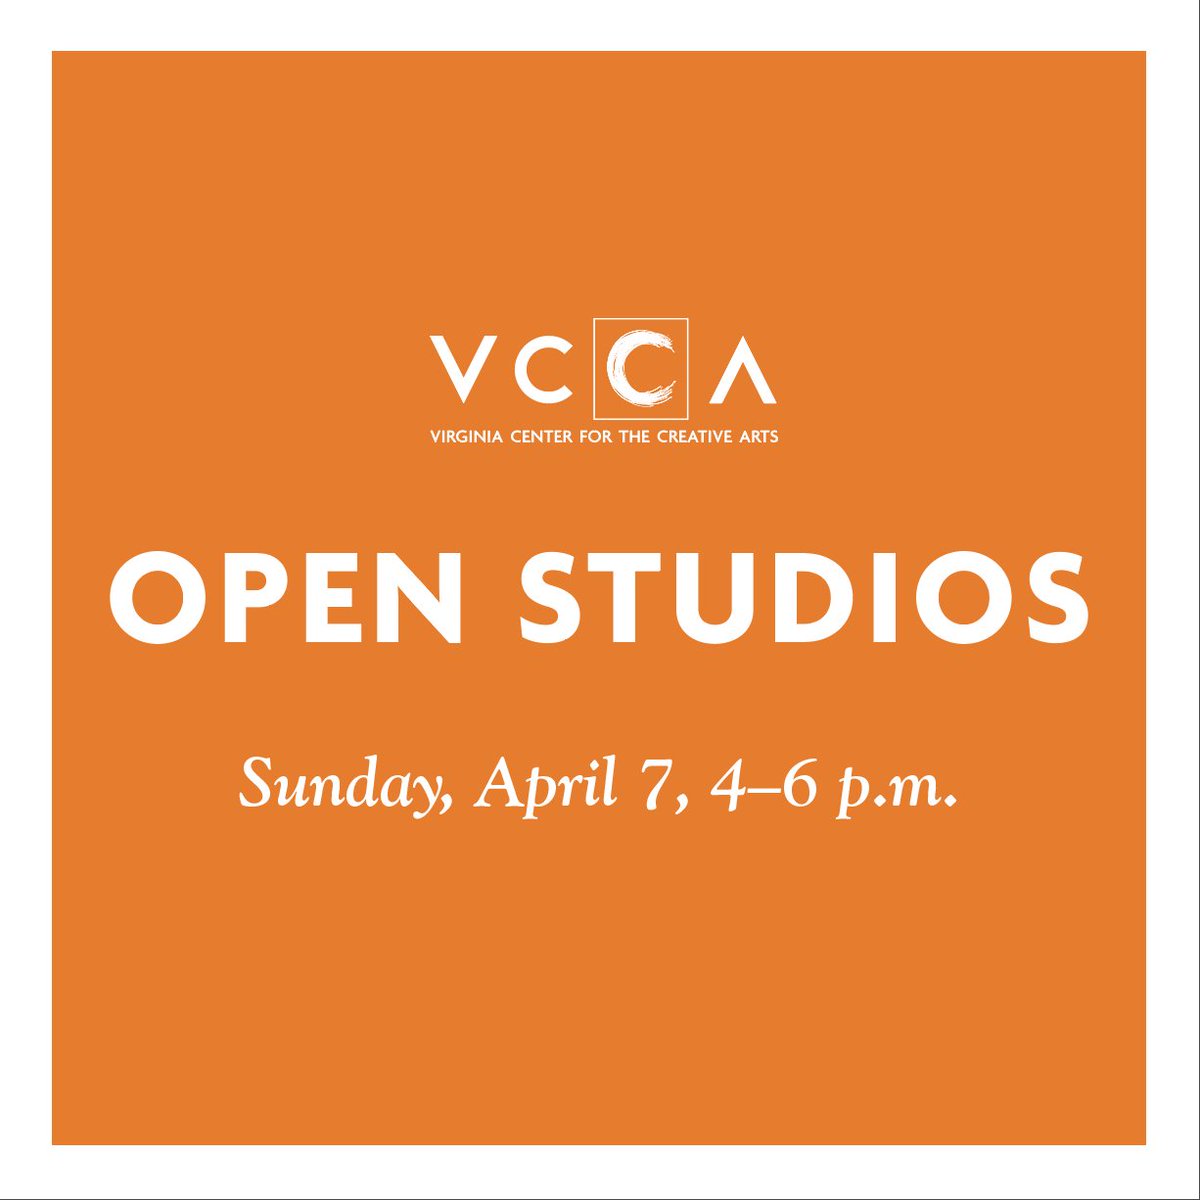 Spring Volunteer Day and Open Studios are coming up this Saturday and Sunday at VCCA! We hope to see new and familiar faces at #MtSanAngelo for these free, public events this weekend. 🌸🌼🌷 vcca.com/volunteer-day 🎨✍️🎼 vcca.com/open-studios